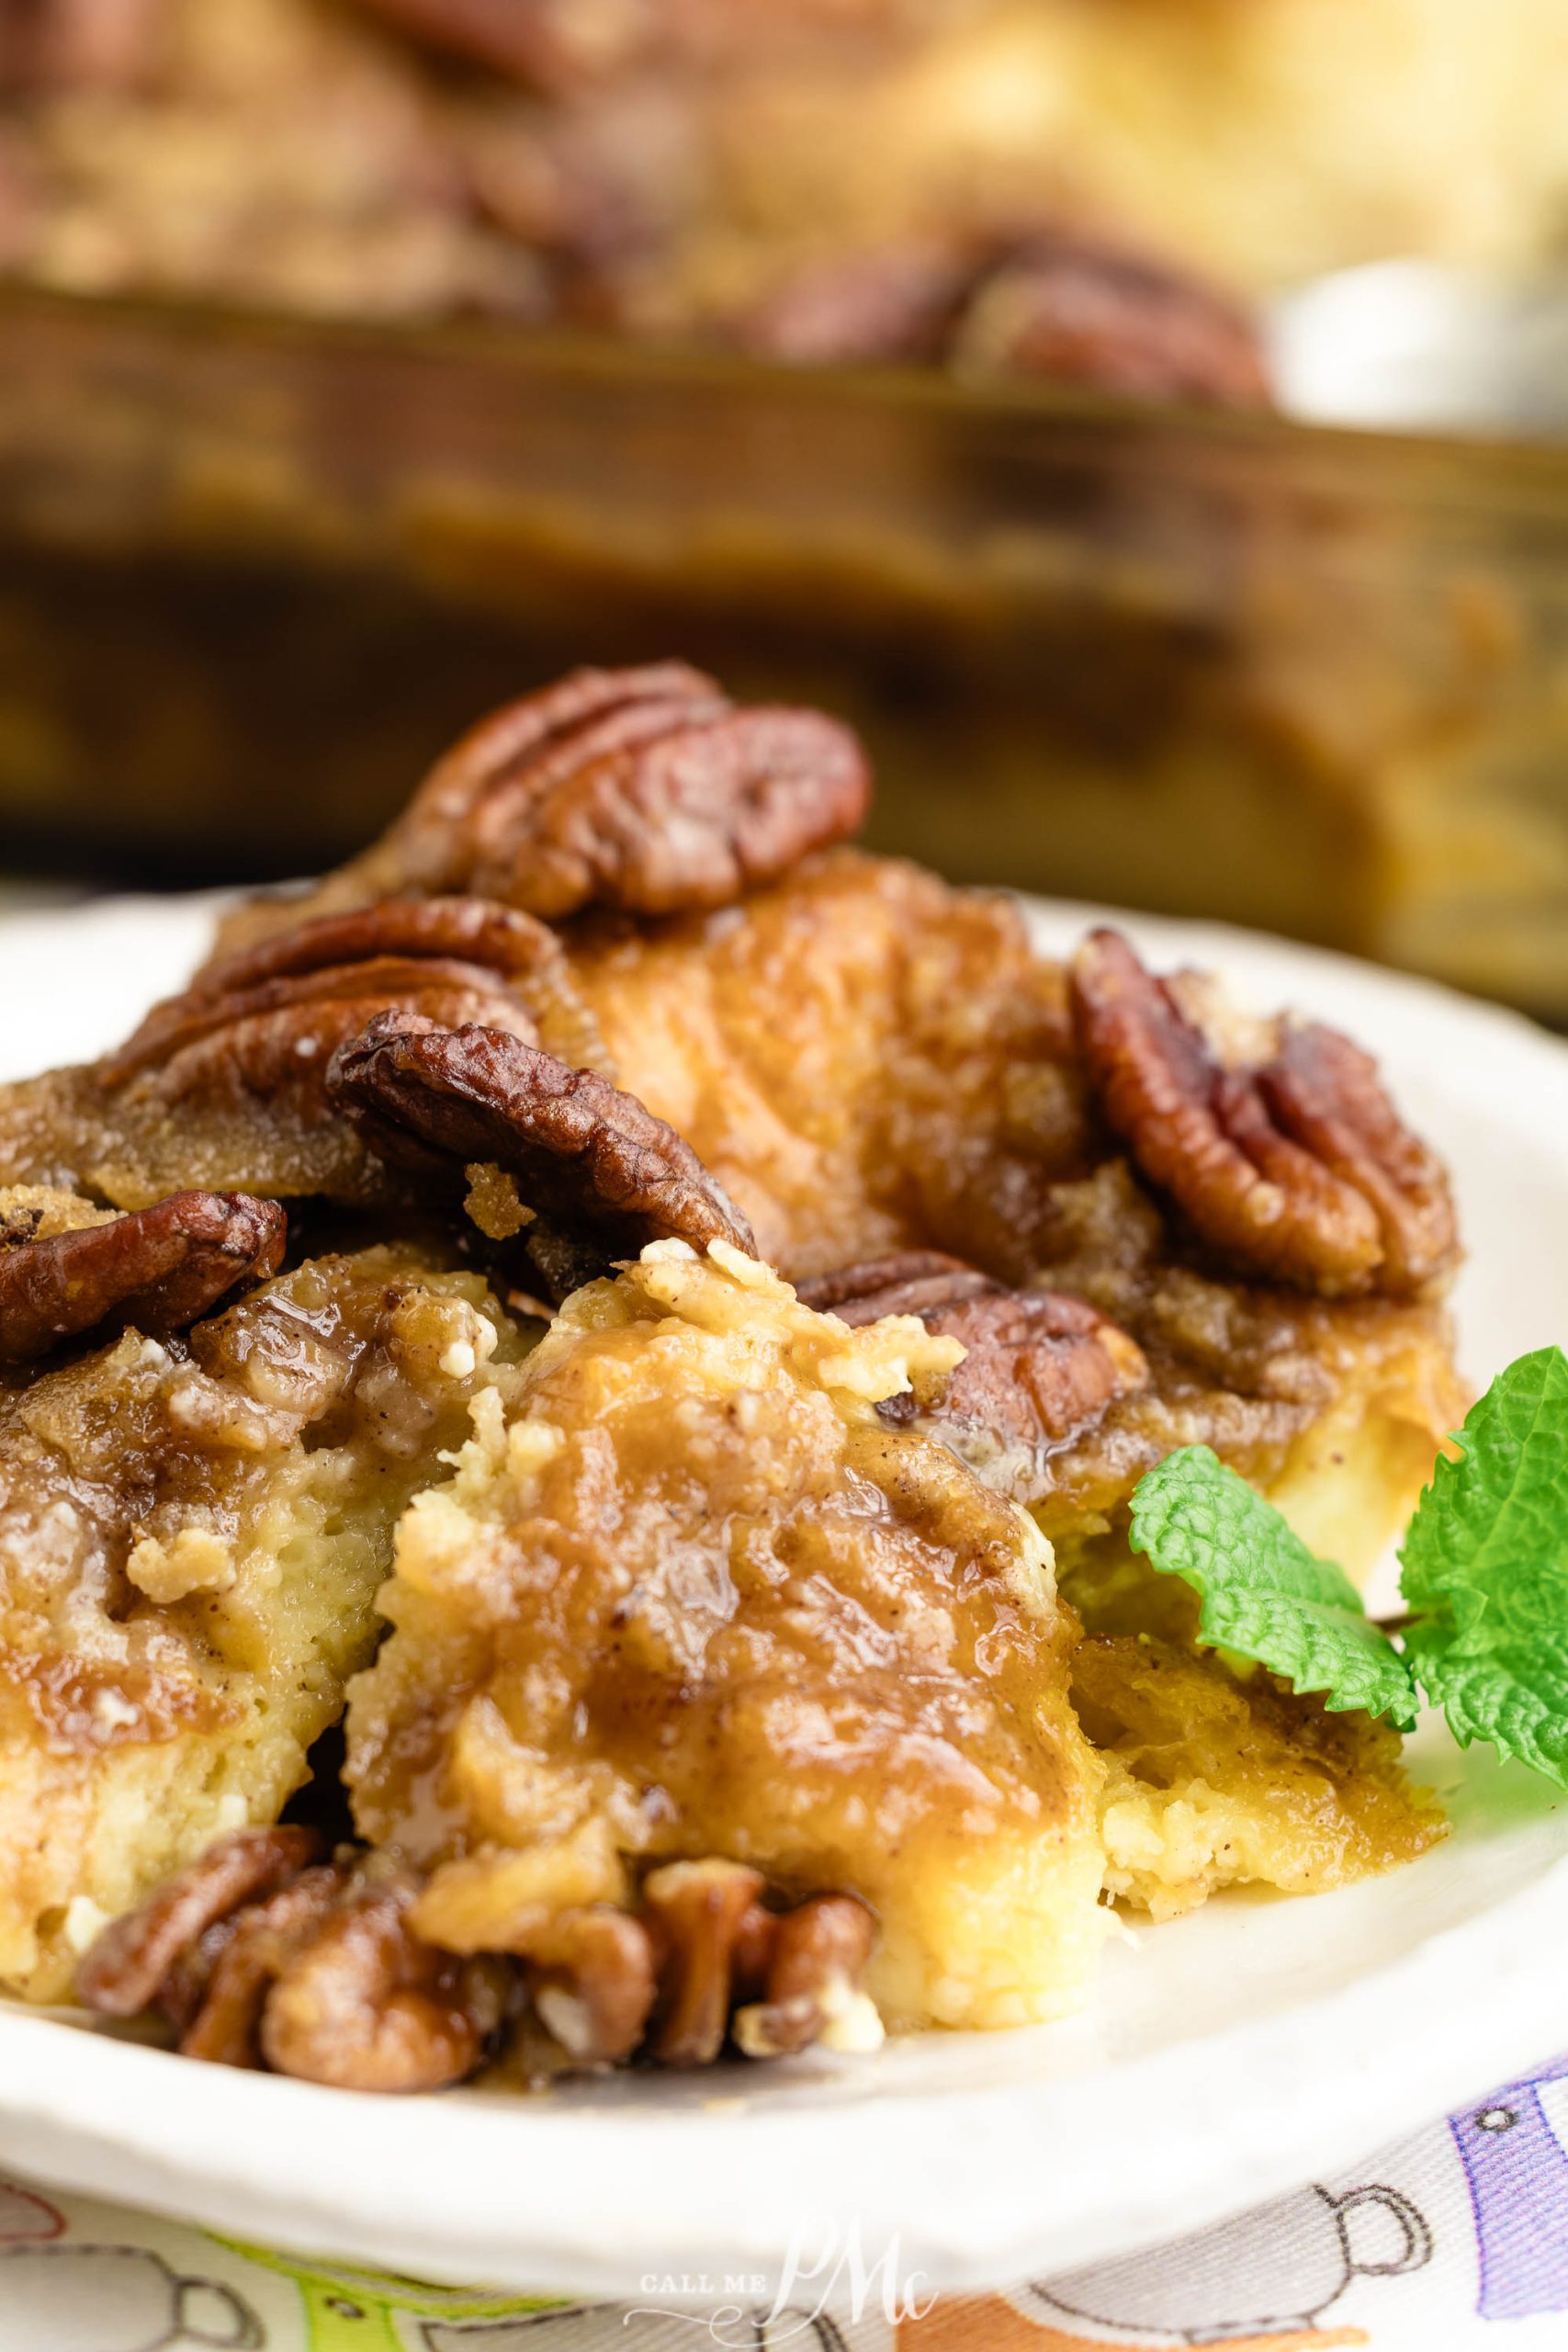 Praline Croissant Bread Pudding with pecans on a plate.